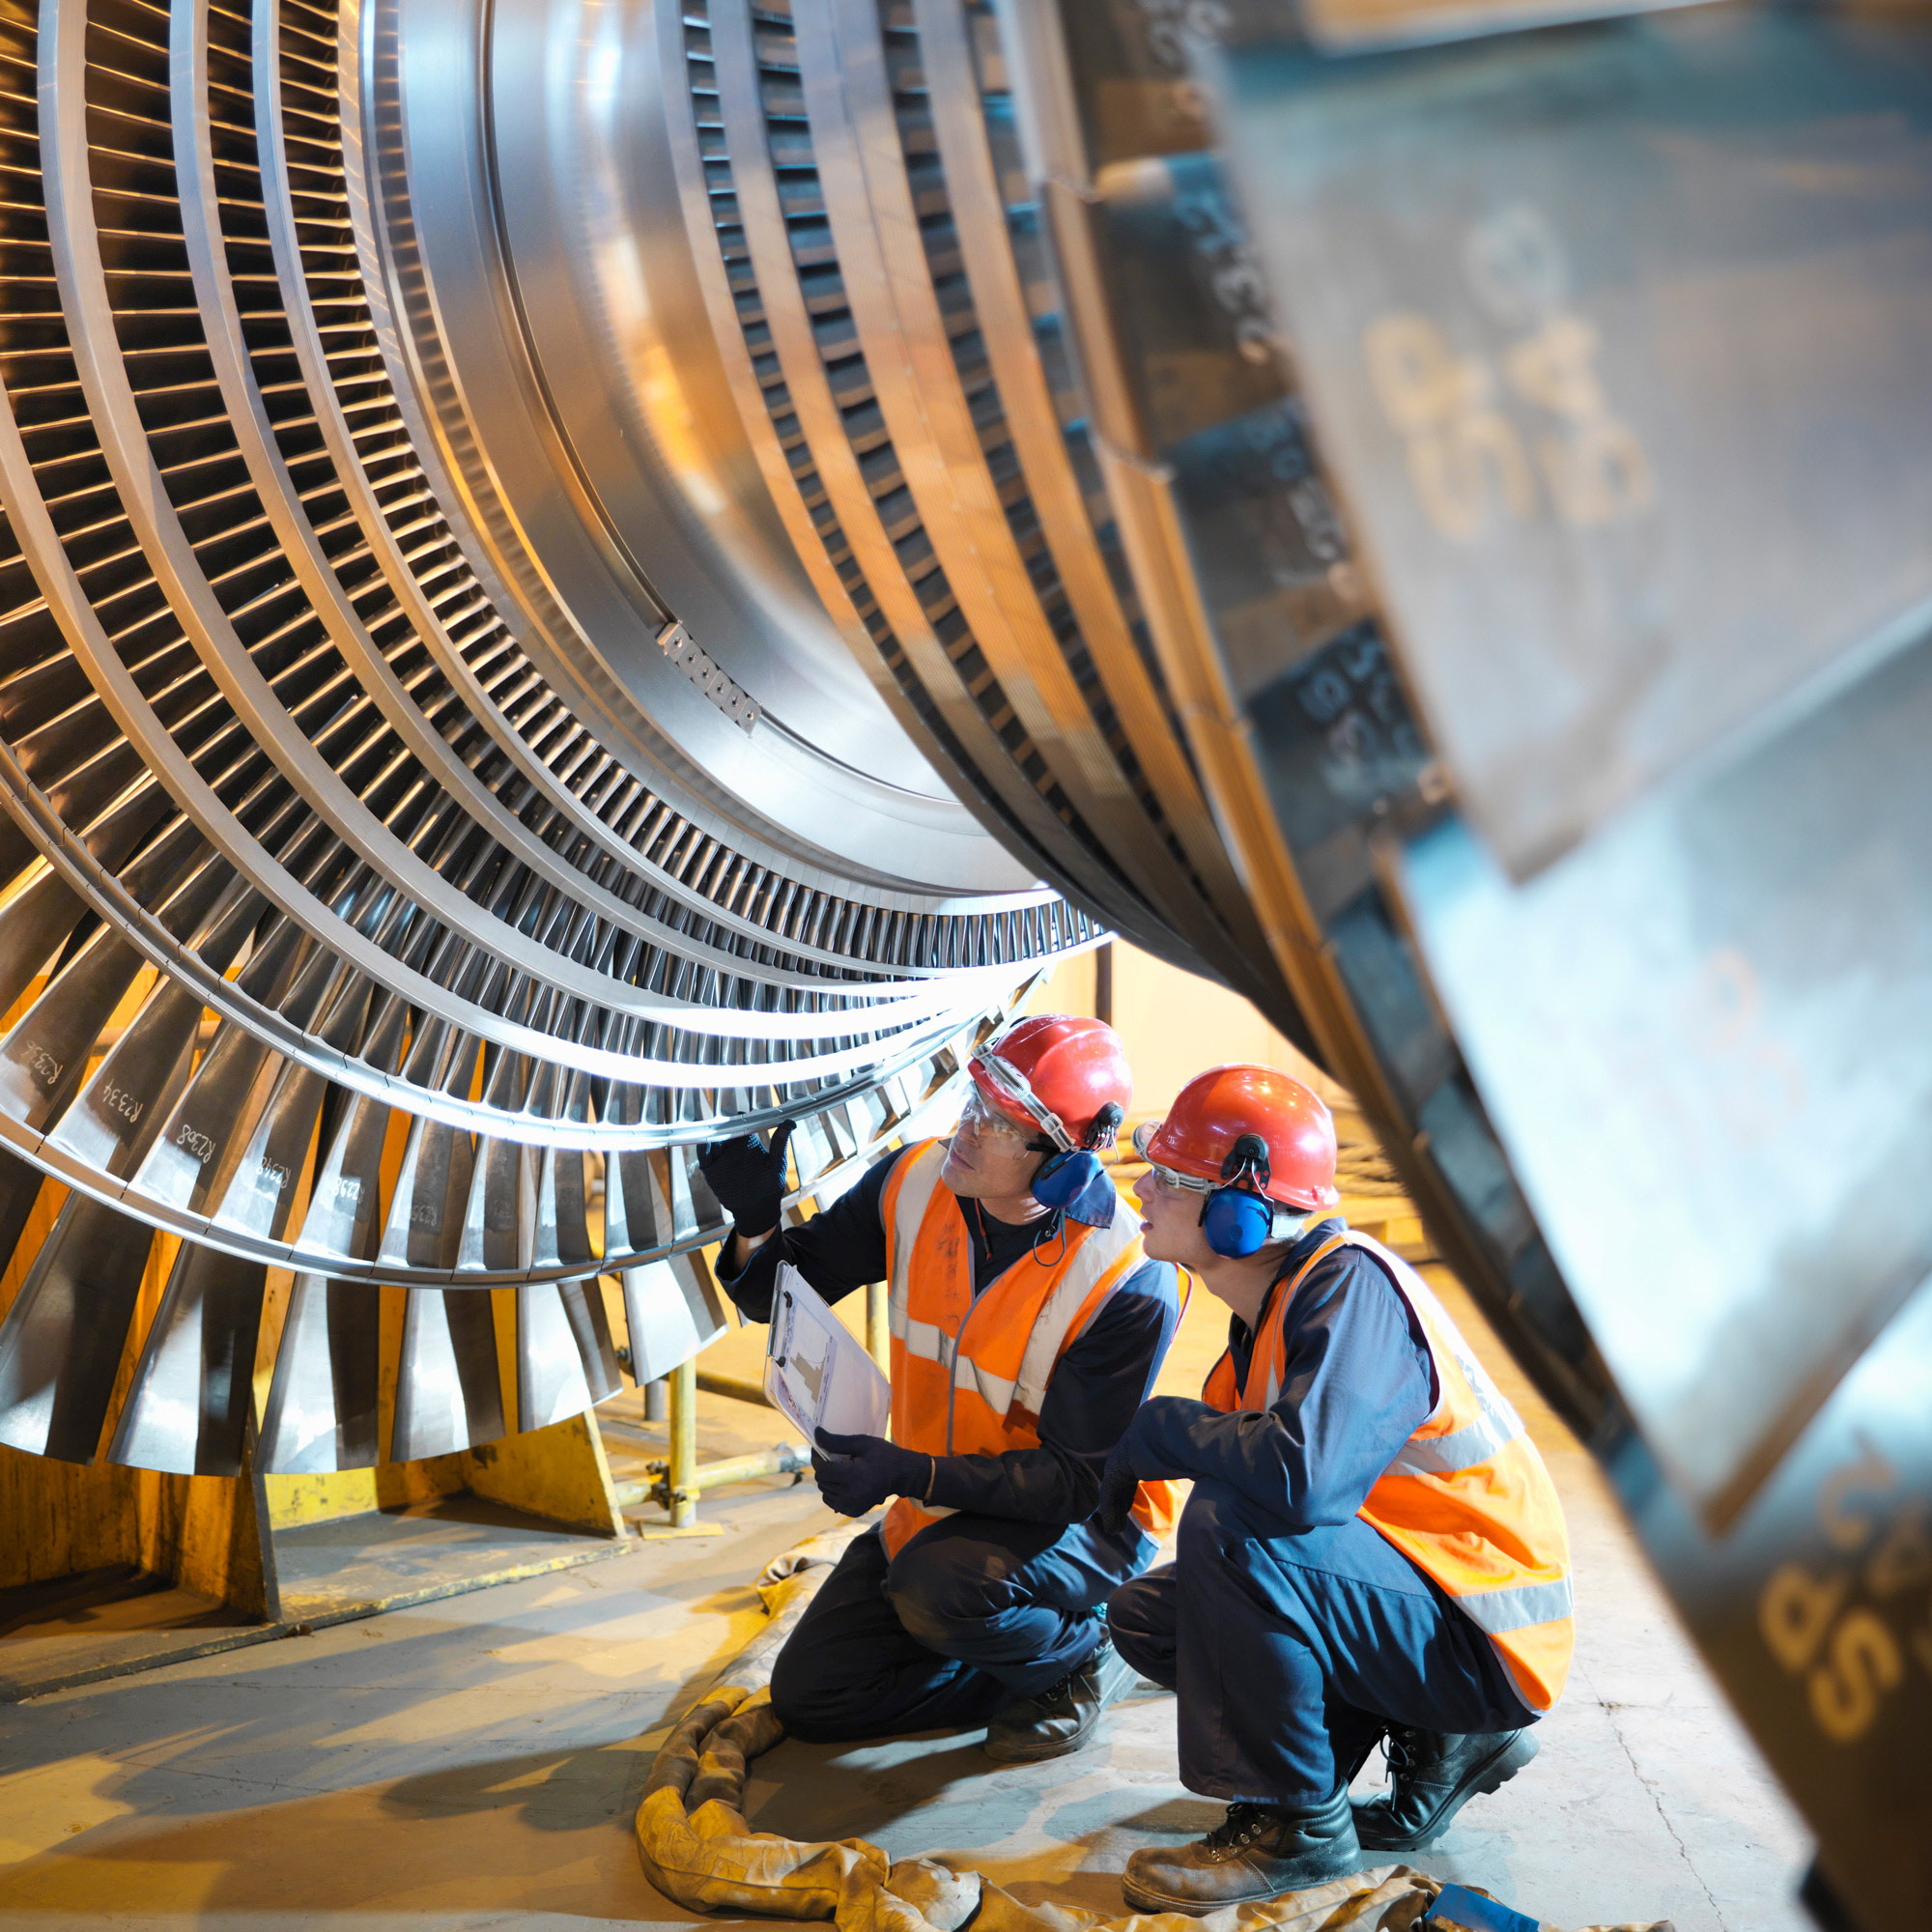 Two workers wearing safety gear inspecting a cargo ship engine component